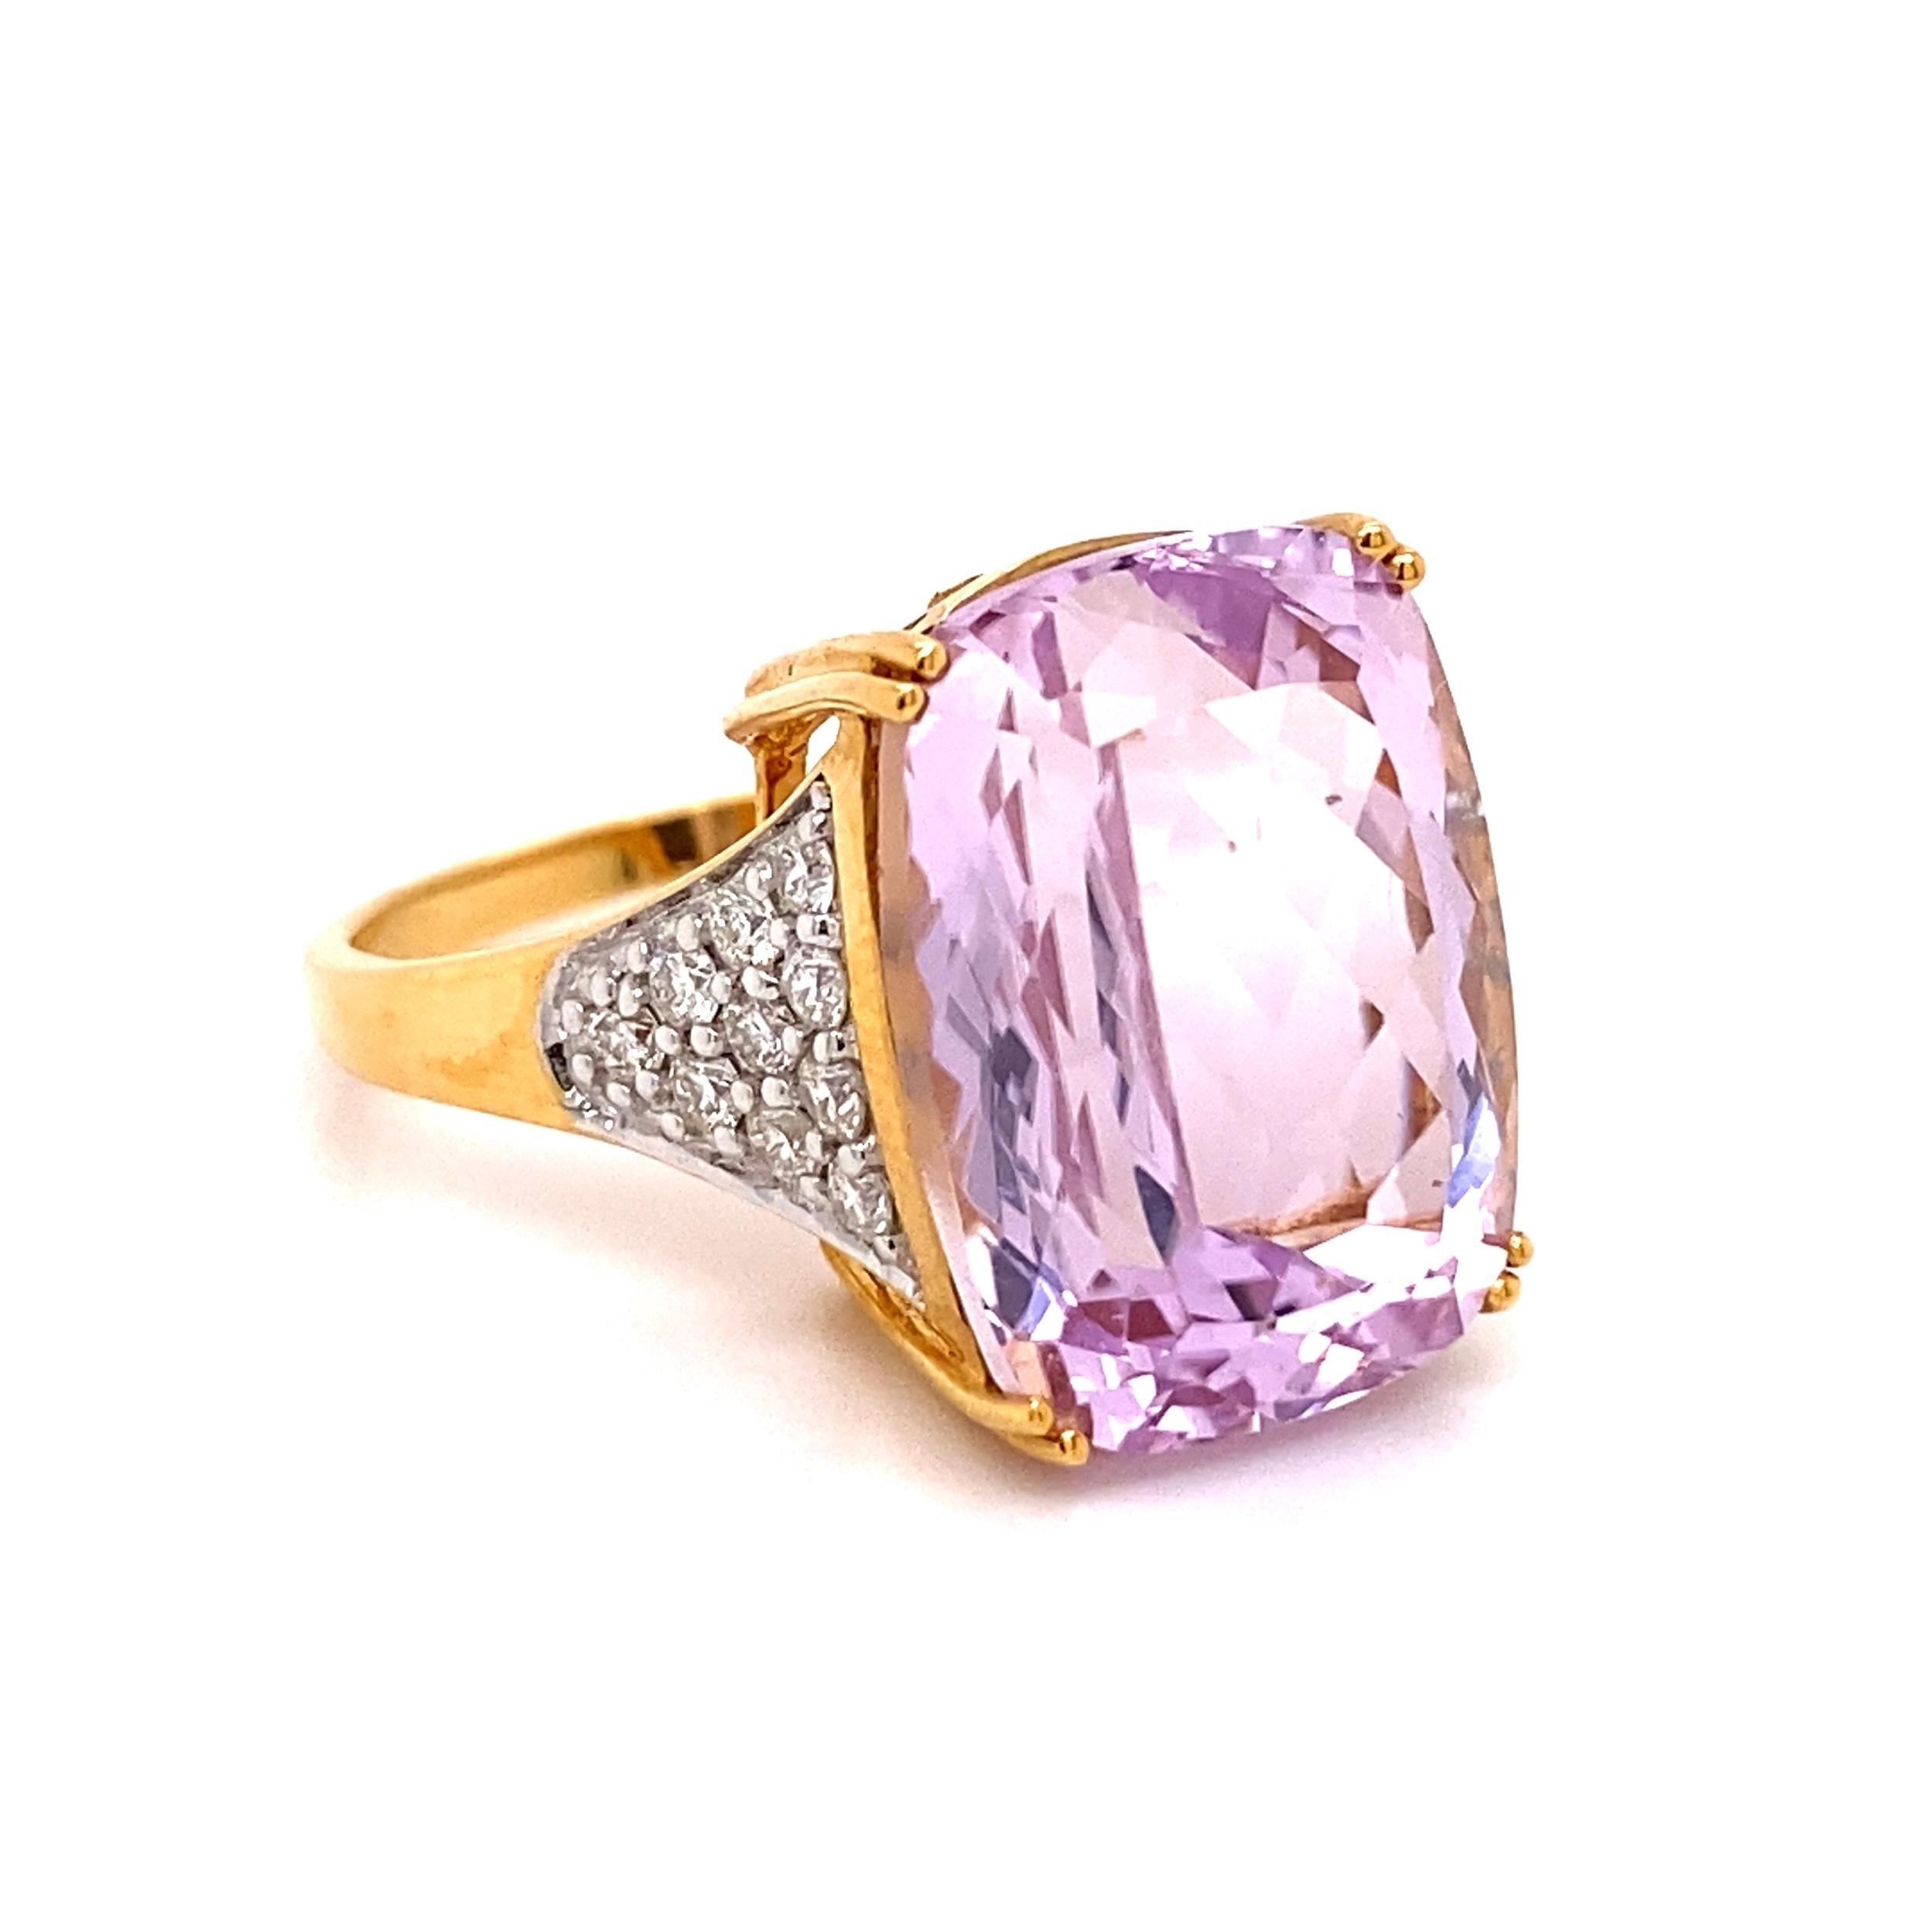 Simply Beautiful! Solitaire Cushion Kunzite and Diamond Gold Cocktail Ring. Centering a Hand set securely nestled 10.09 Carat Cushion Kunzite. Enhanced either side of shank with Diamonds, weighing approx. 0.40tcw. Hand crafted 18K Yellow Gold